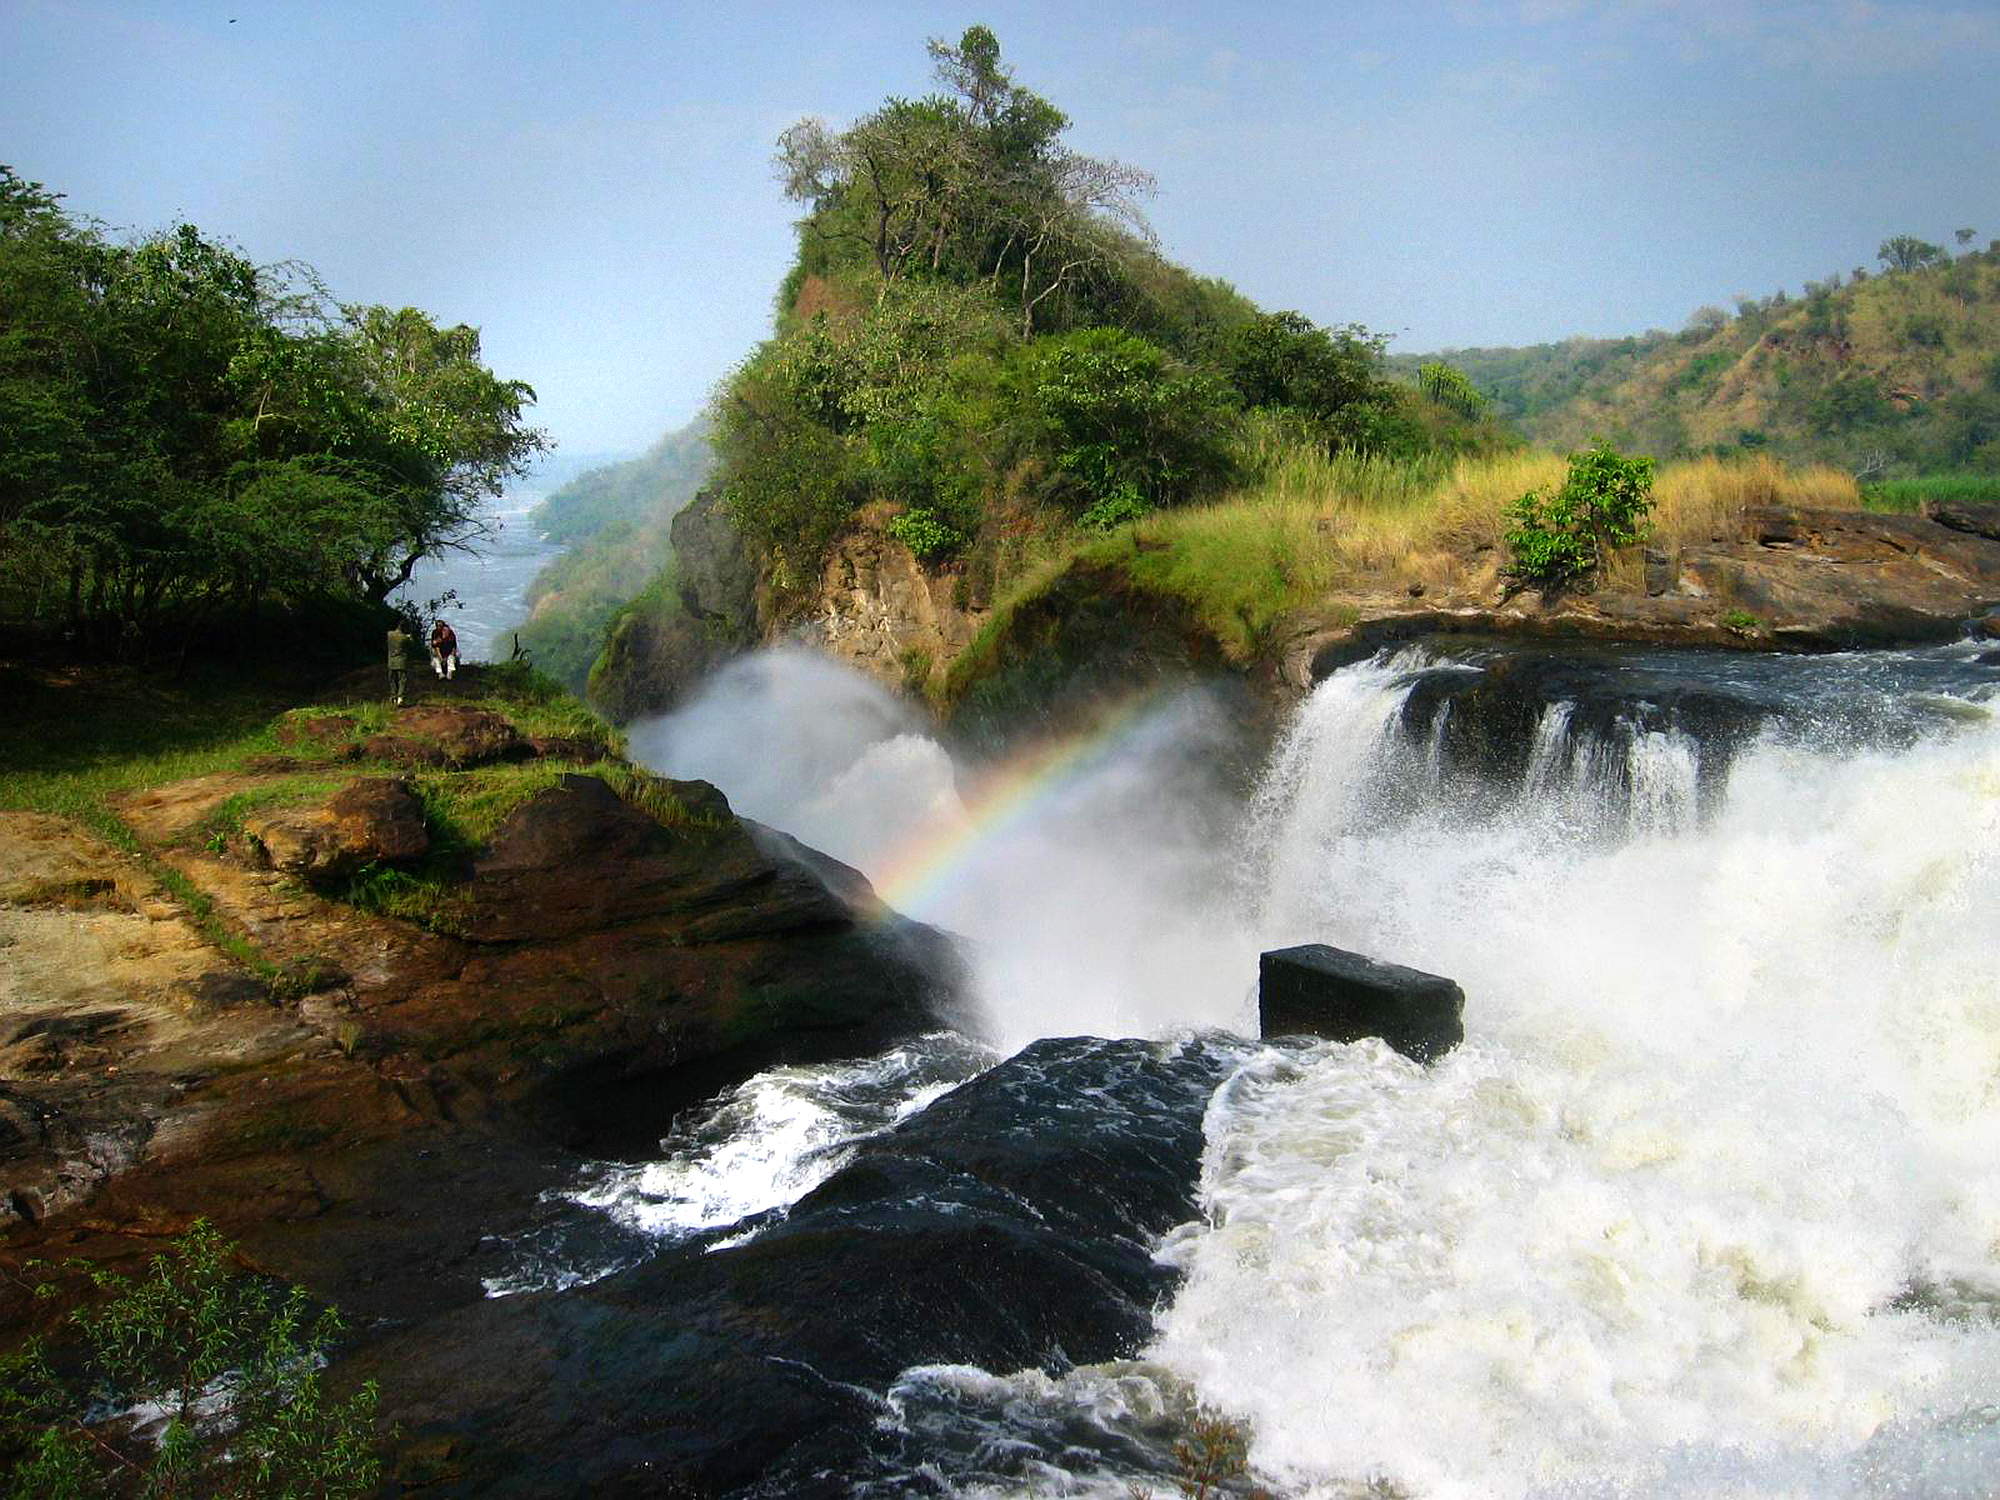 Guide to Murchison falls National Park